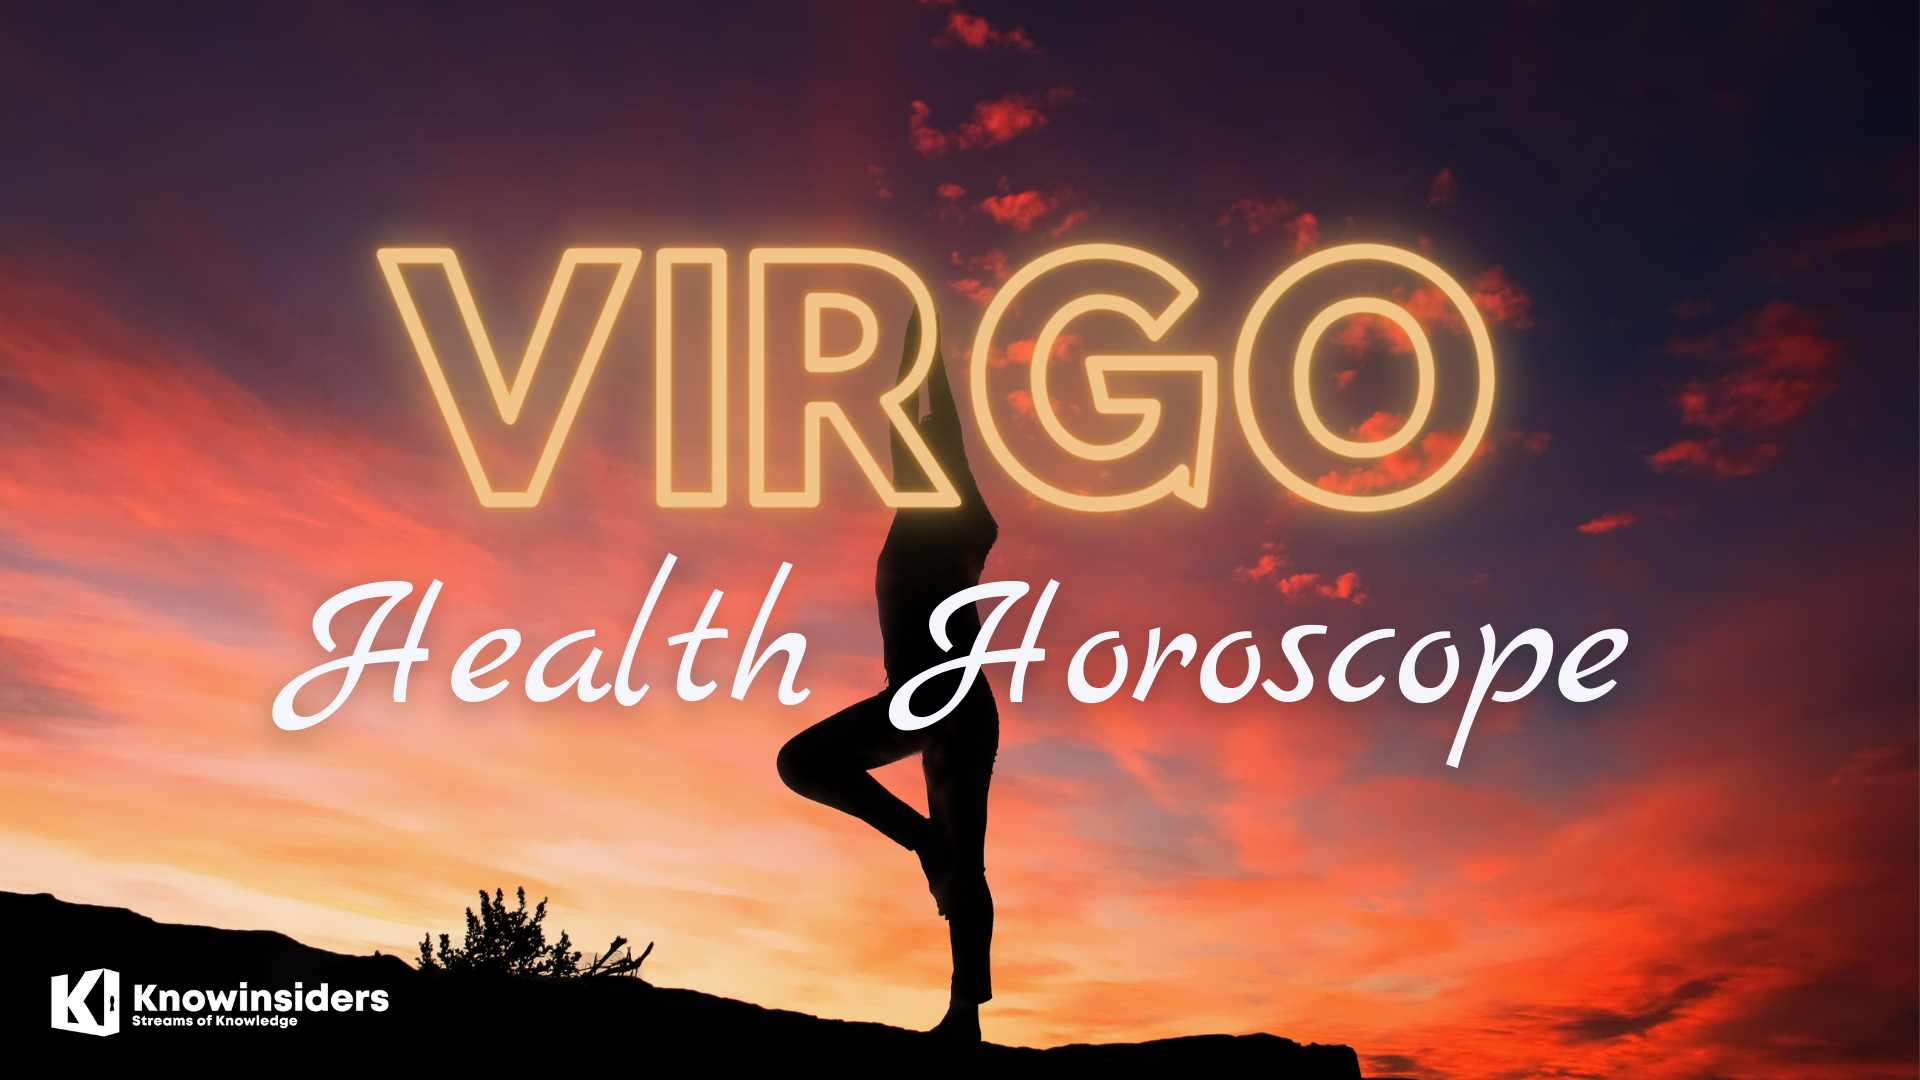 virgo horoscope astrological prediction for your beauty and health